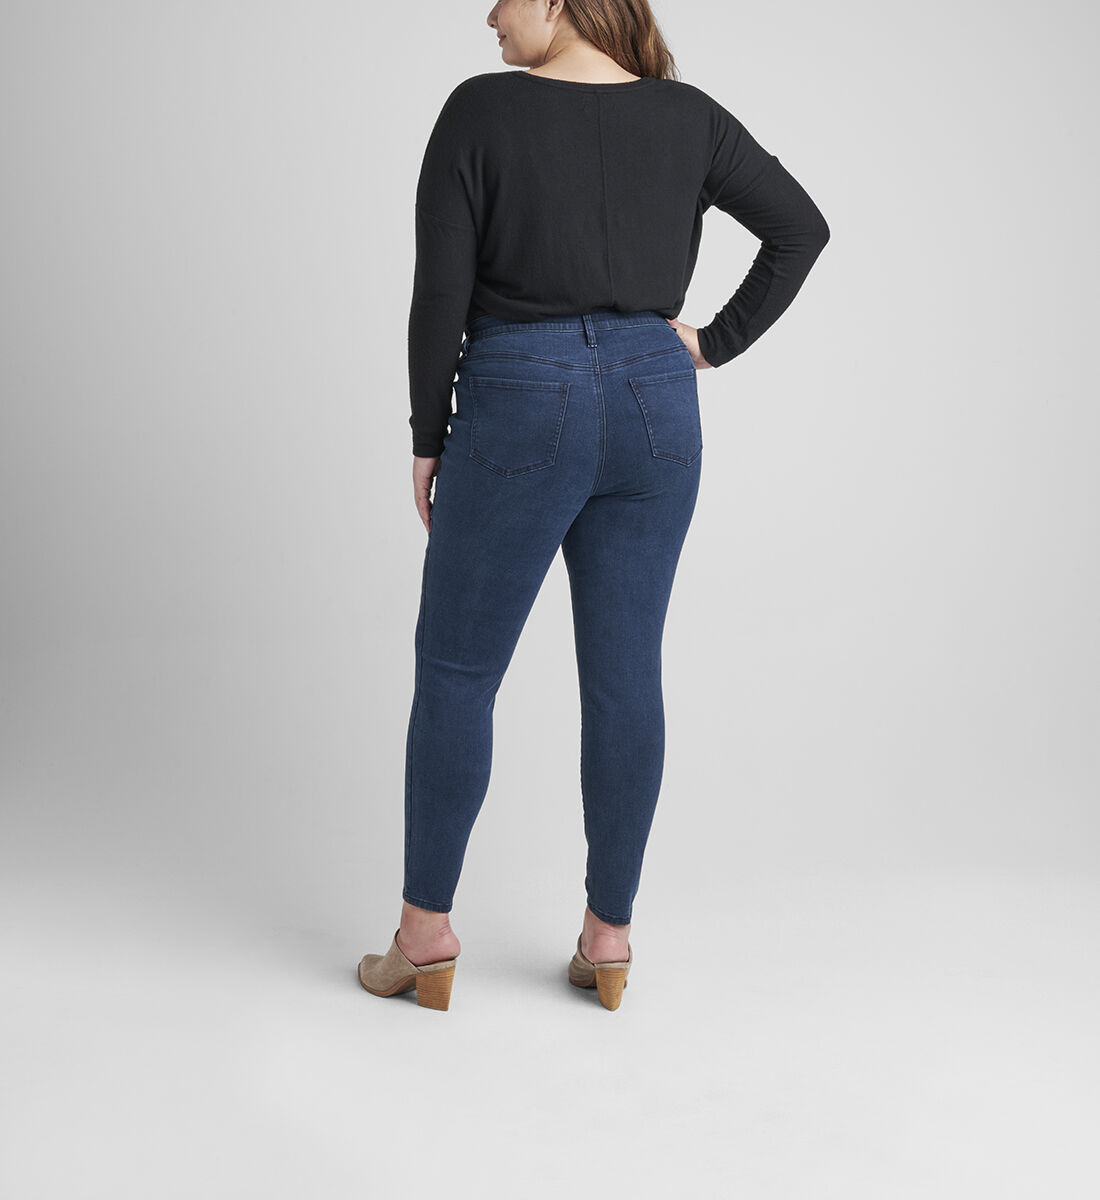 Cecilia High Rise Skinny Jeans Plus Size Back